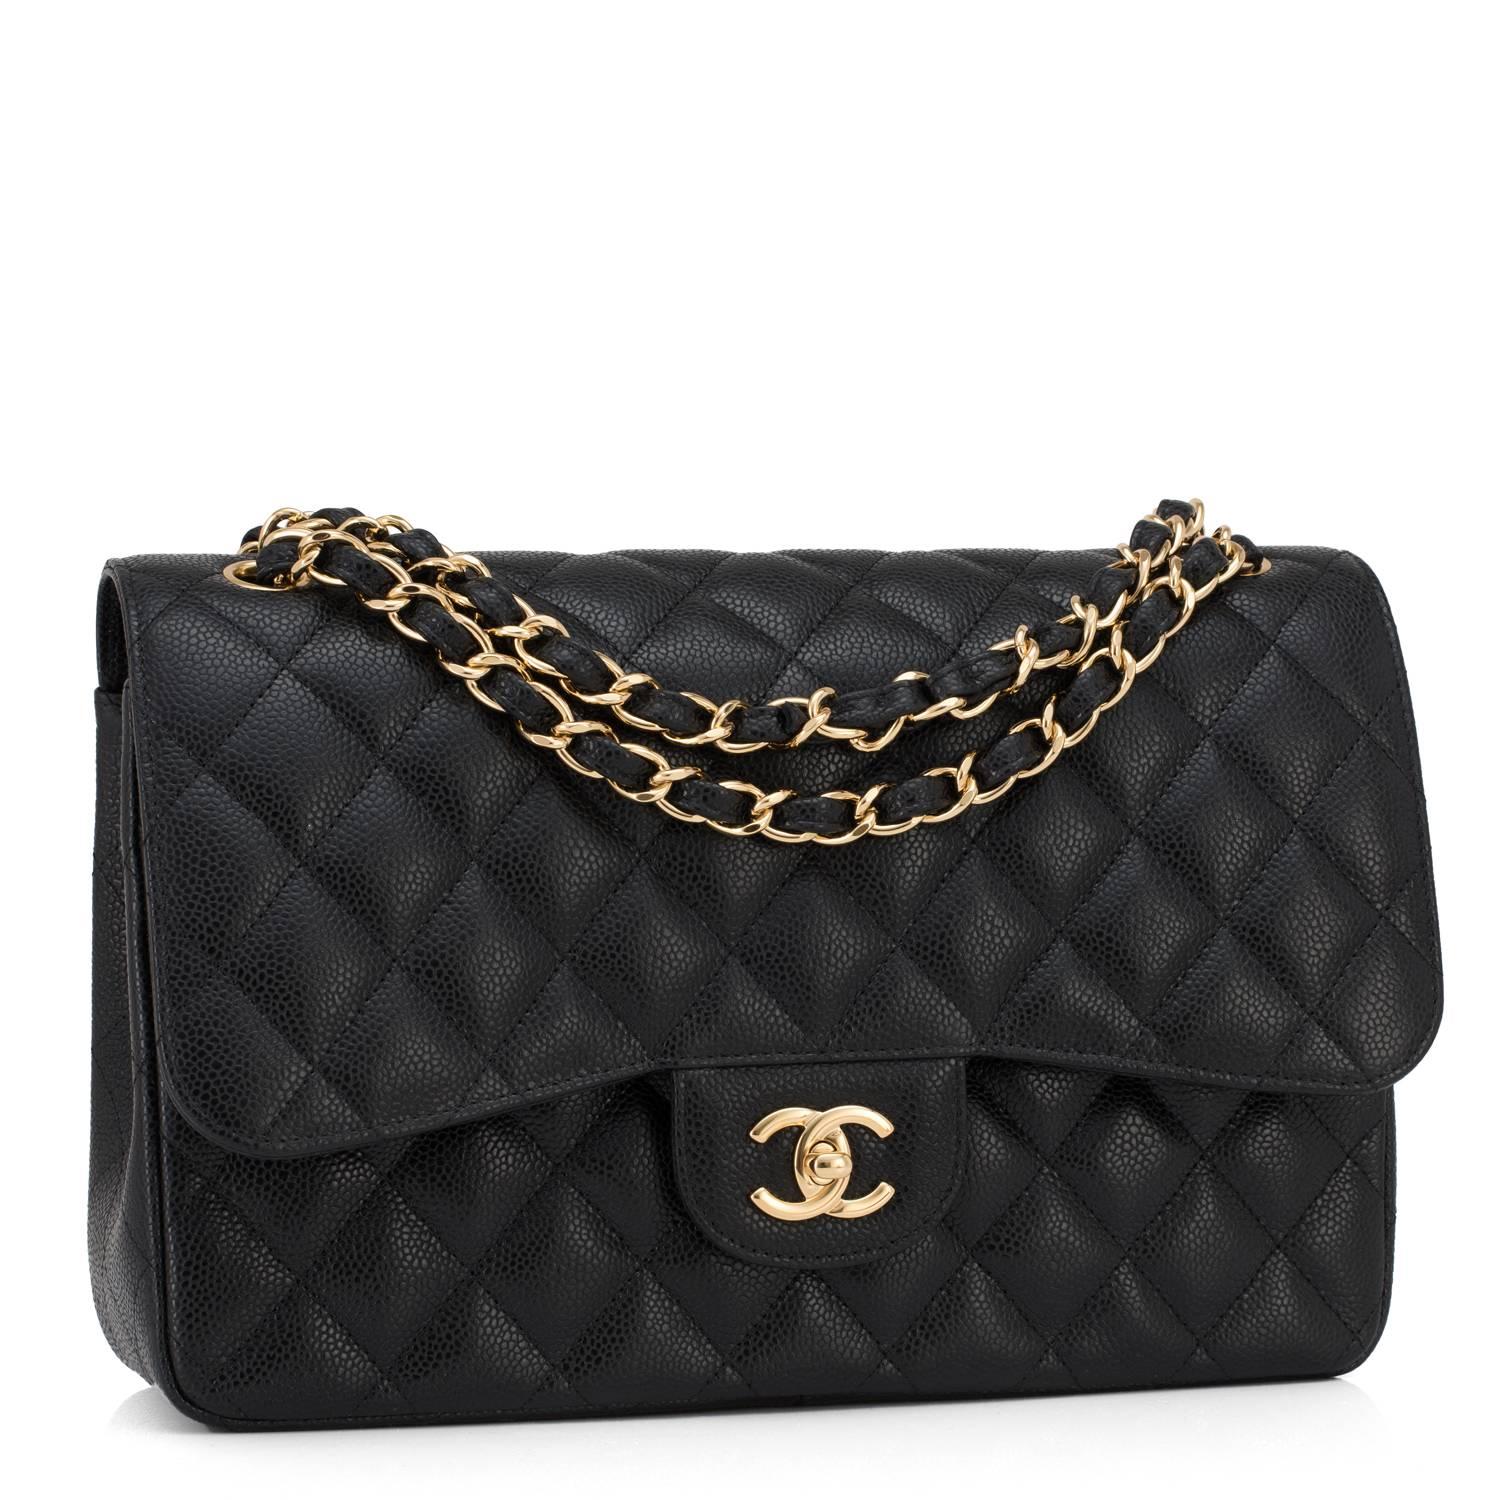 Chanel Black Quilted Caviar Jumbo Classic Double Flap Bag Gold Hardware
Brand New in Box. Store Fresh. Pristine Condition.
Perfect gift! Comes with Chanel sleeper, Chanel box, Certificate of Authenticity, and Care Booklet.
If you buy only one Chanel